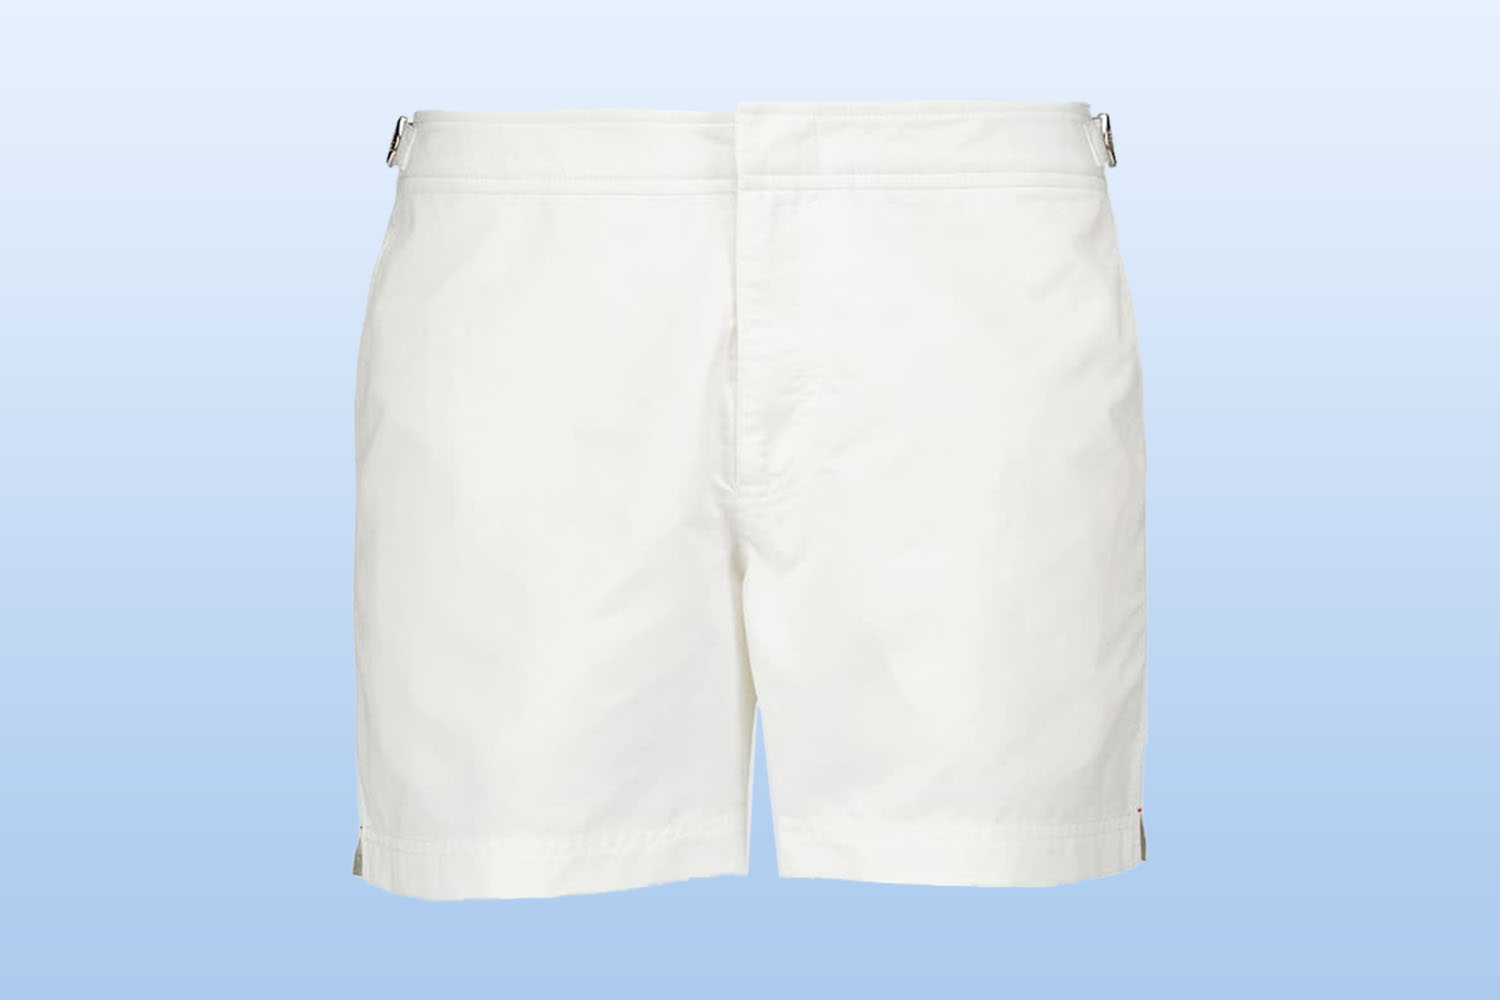 Pair of white swim trunks from mytheresa on a light blue background